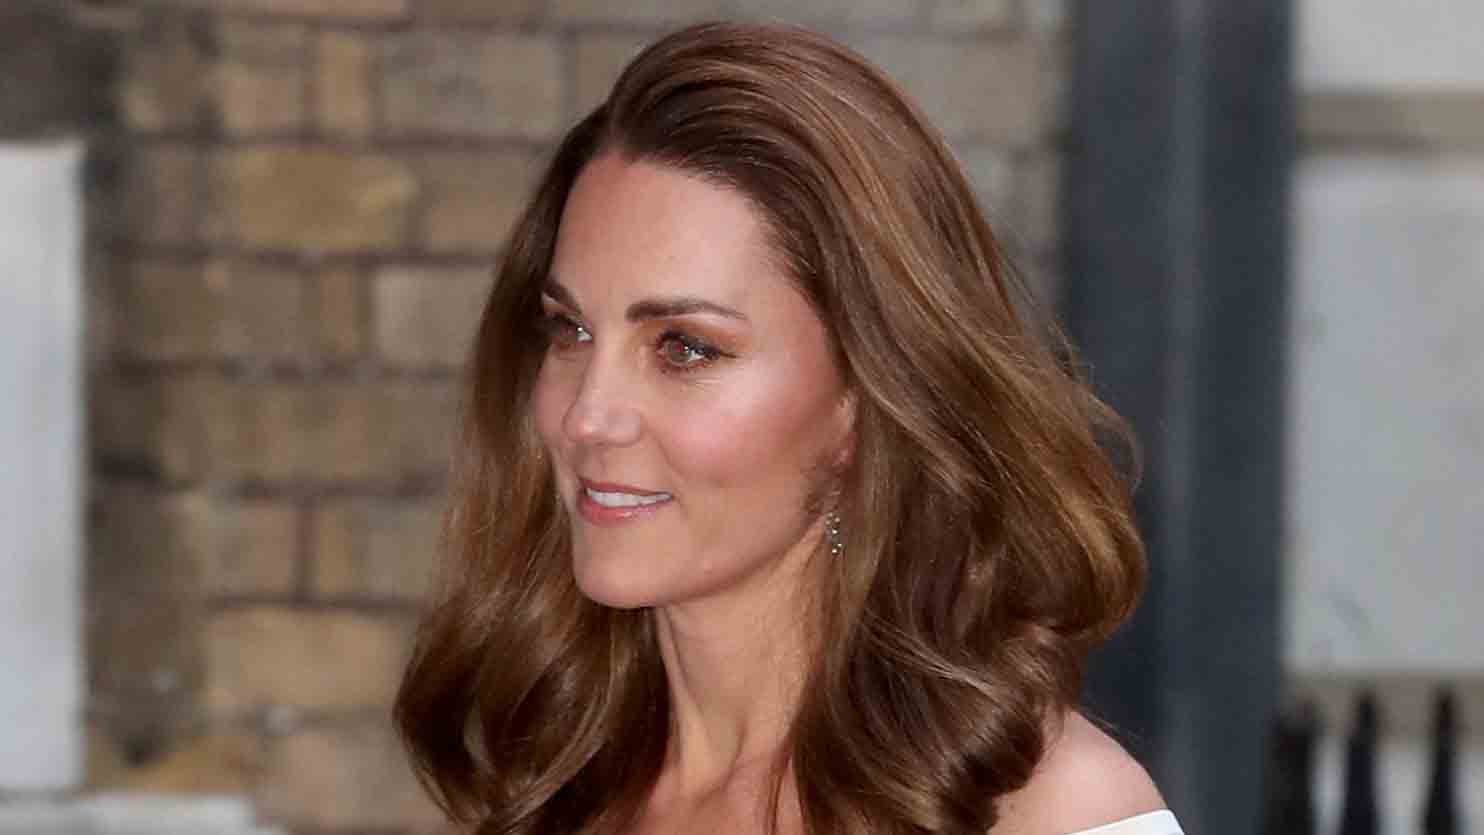 Effortless beauty! Duchess Kate steals the show in bold white number